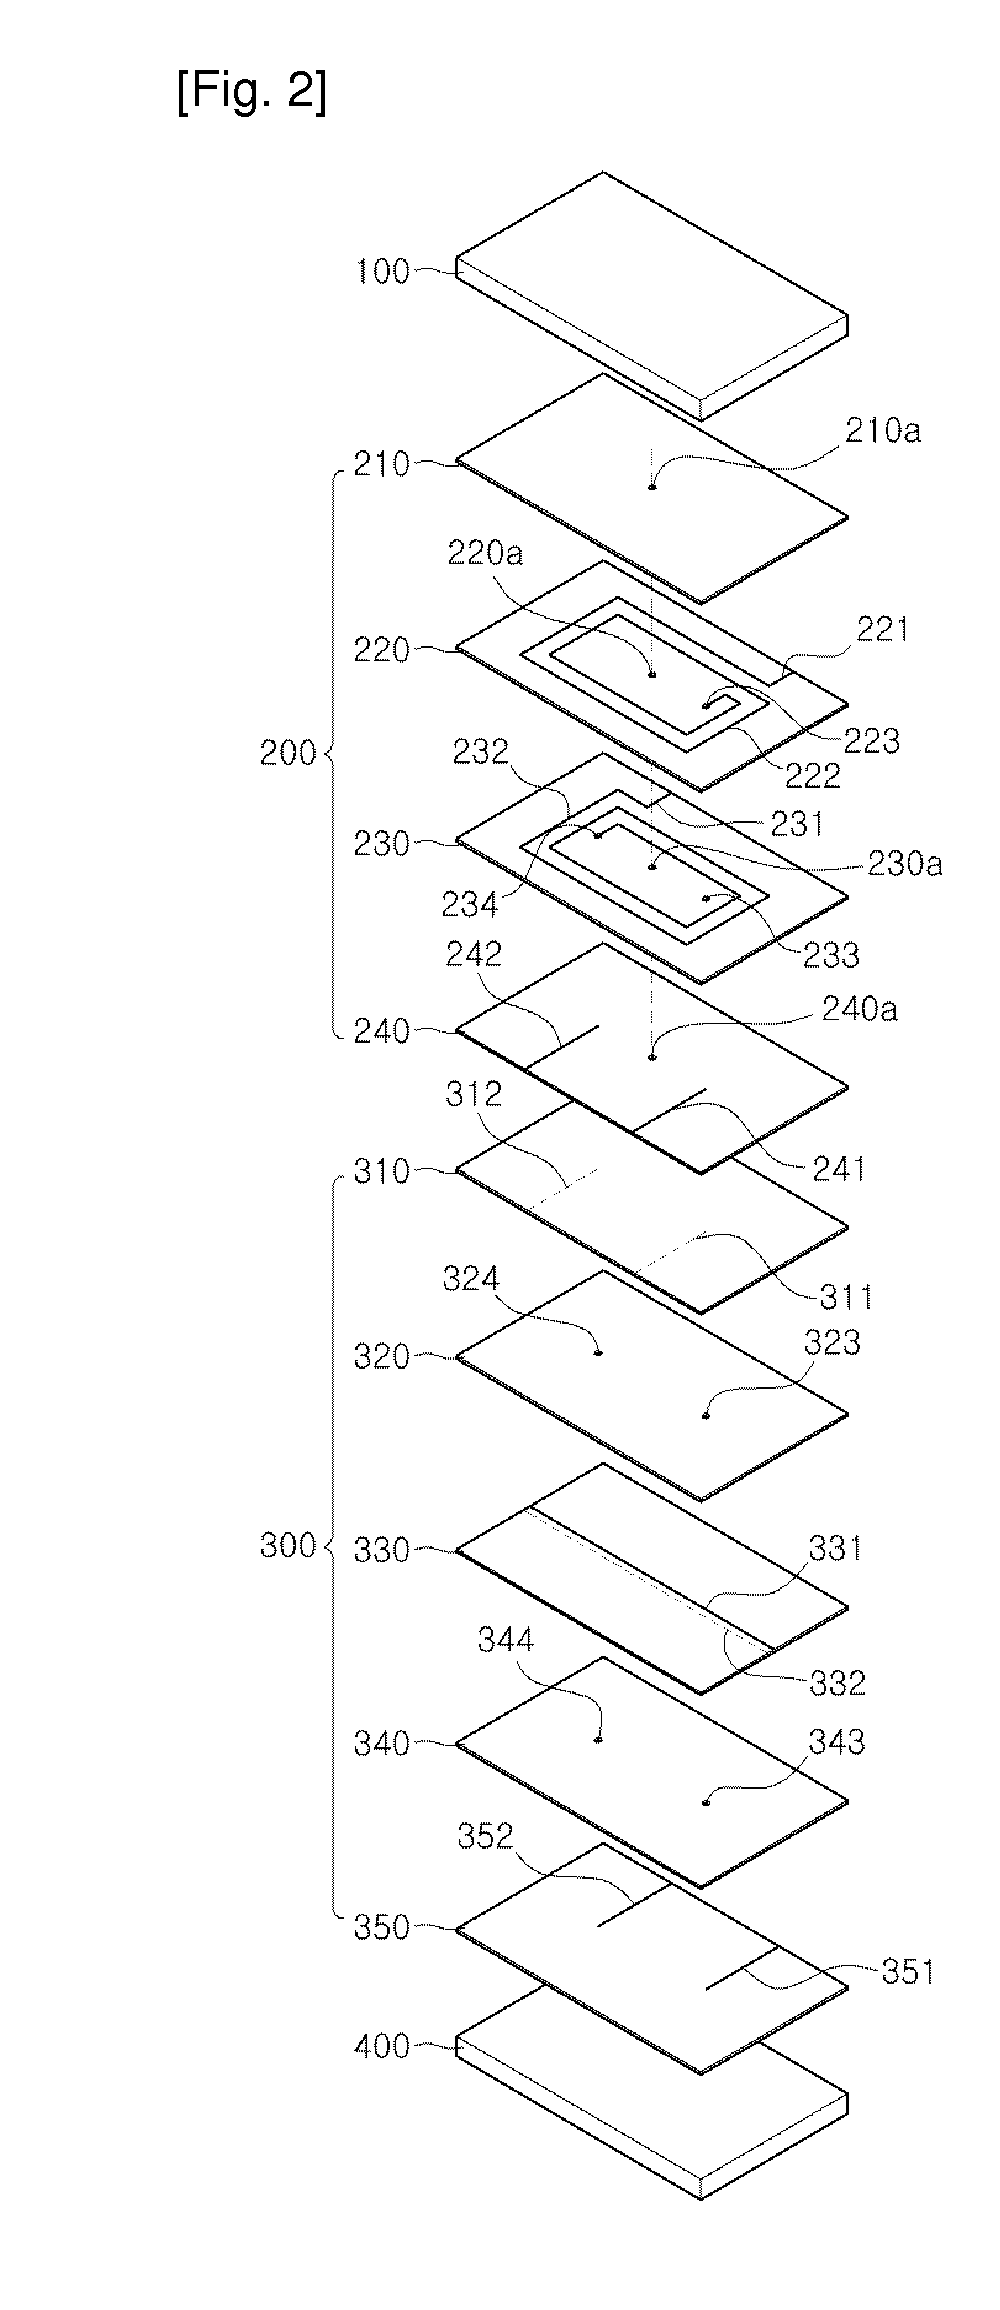 Circuit protection device and method of manufacturing the same